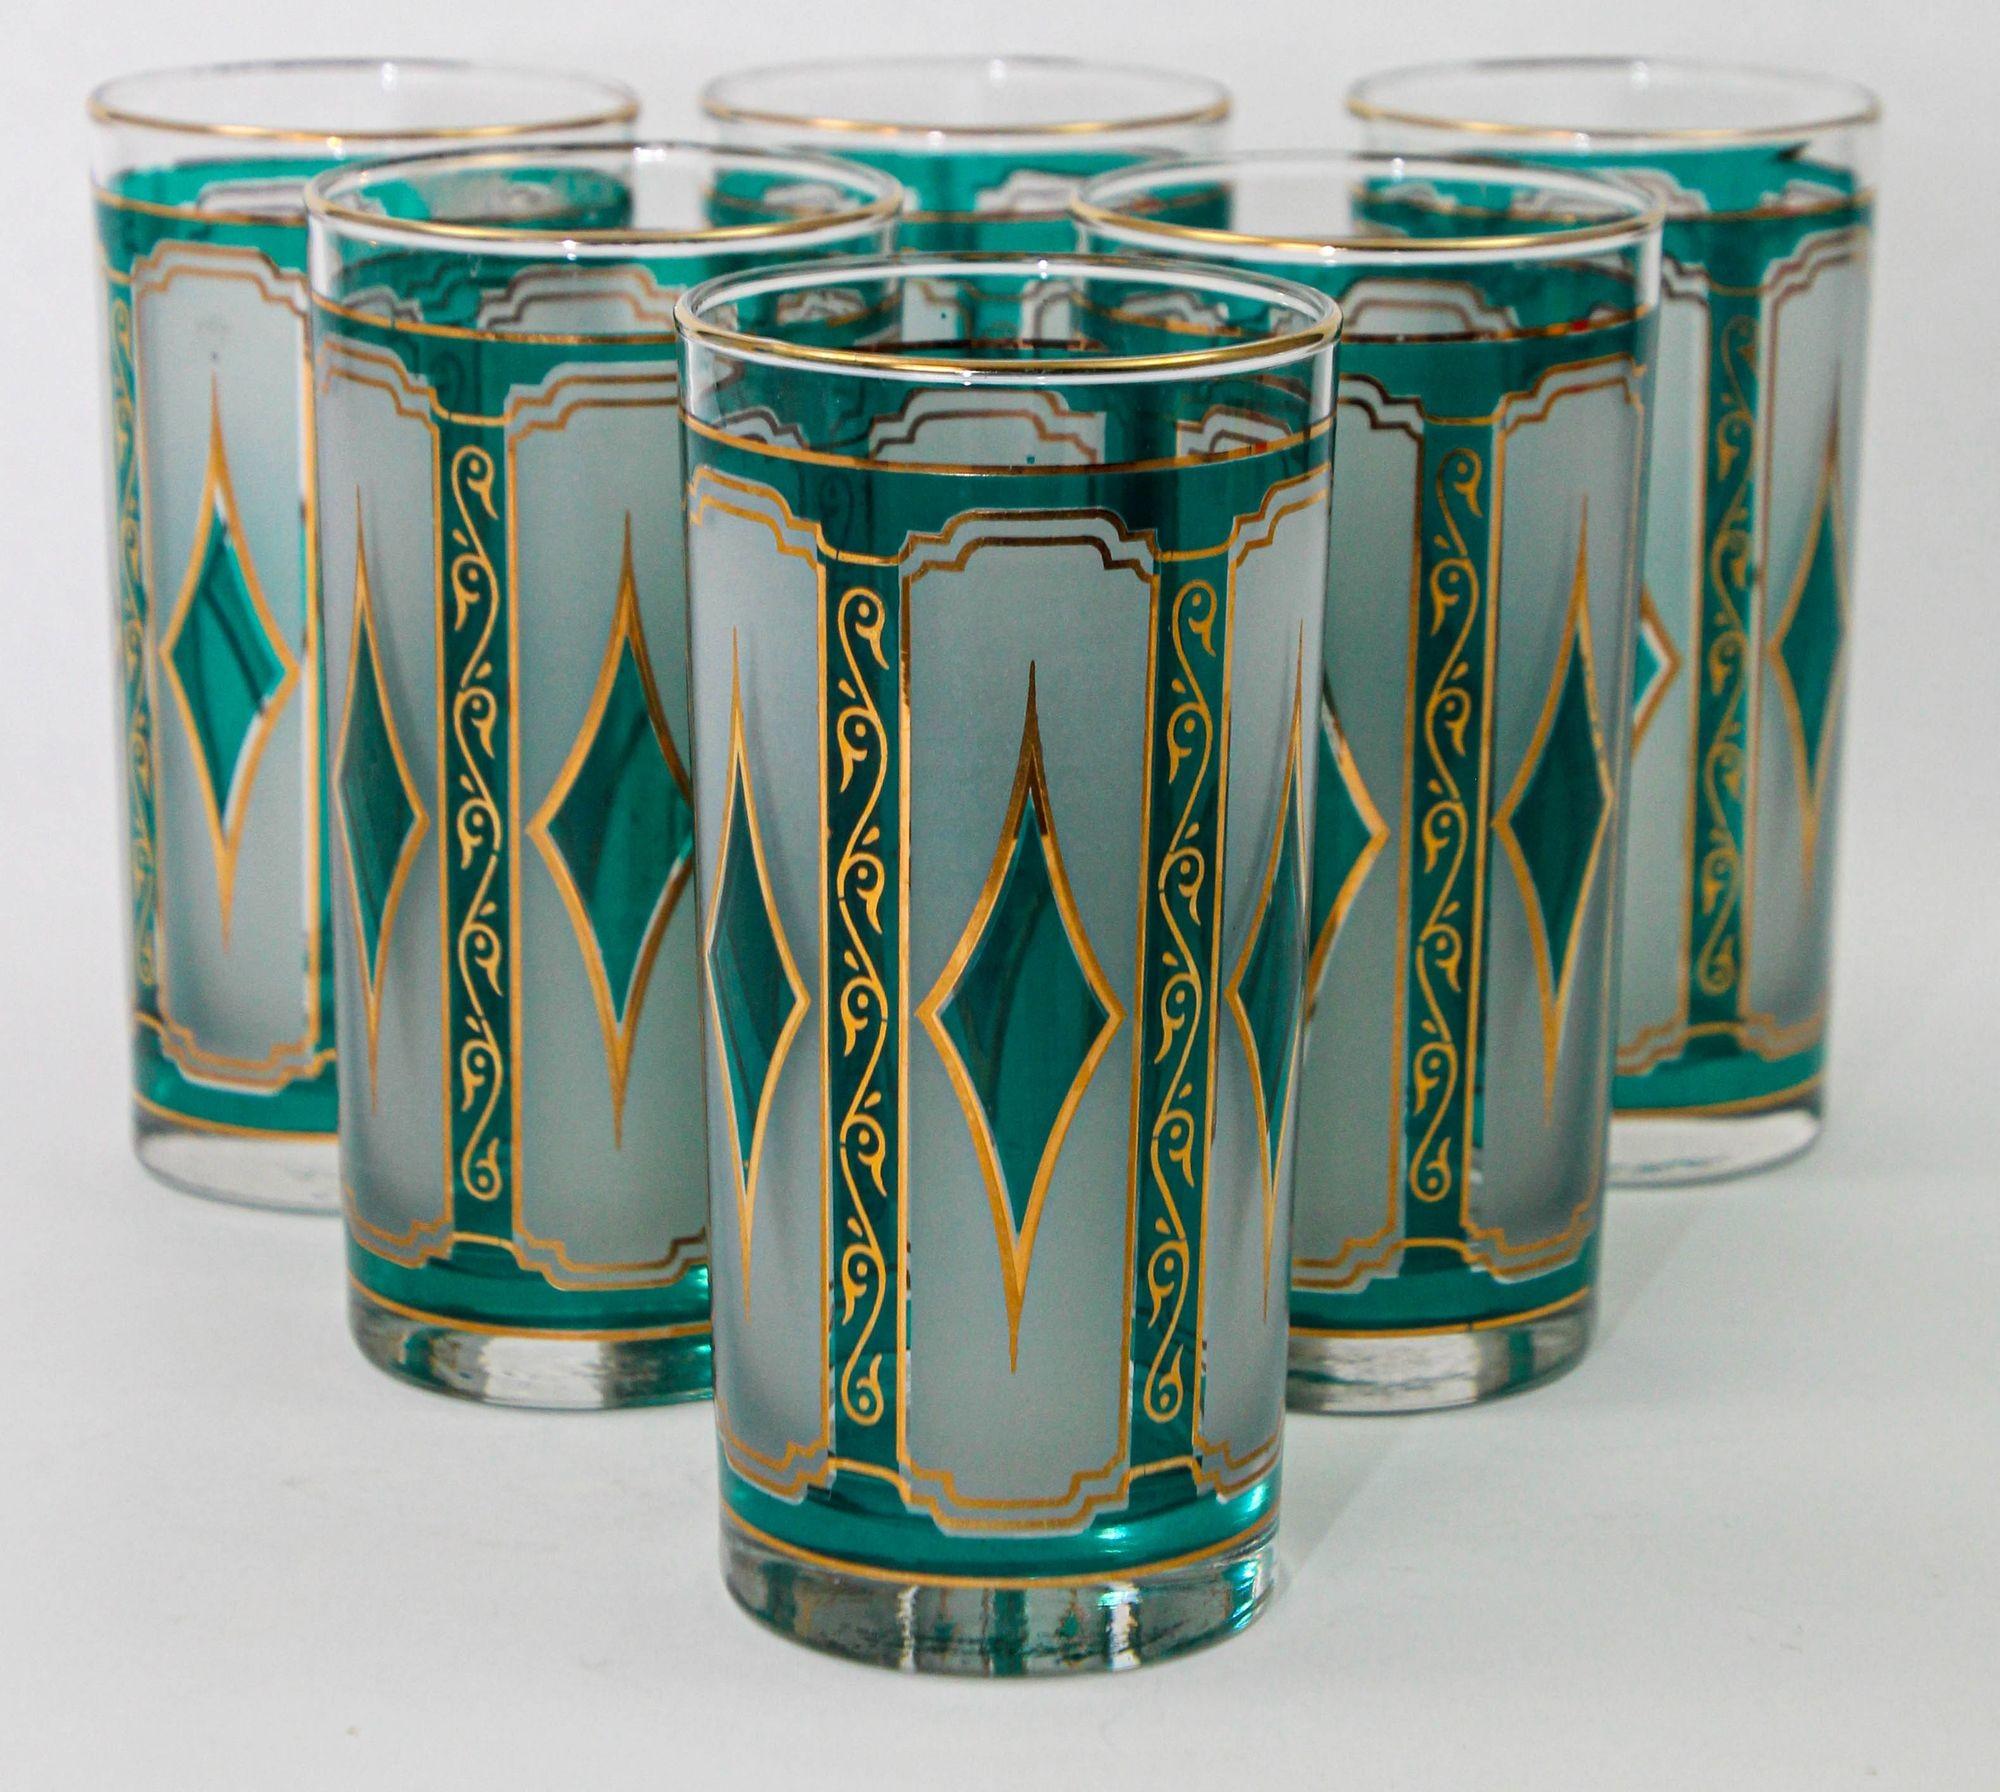 Libbey Emerald Green with 22-Karat Gold Diamond Glasses set of 6.
Libbey 1960s Emerald Blue and 22-Karat Gold Diamond Drinking Glasses.
The blue diamond graphics have a stained glass type of feel to them, while the gold detailing on the glasses is